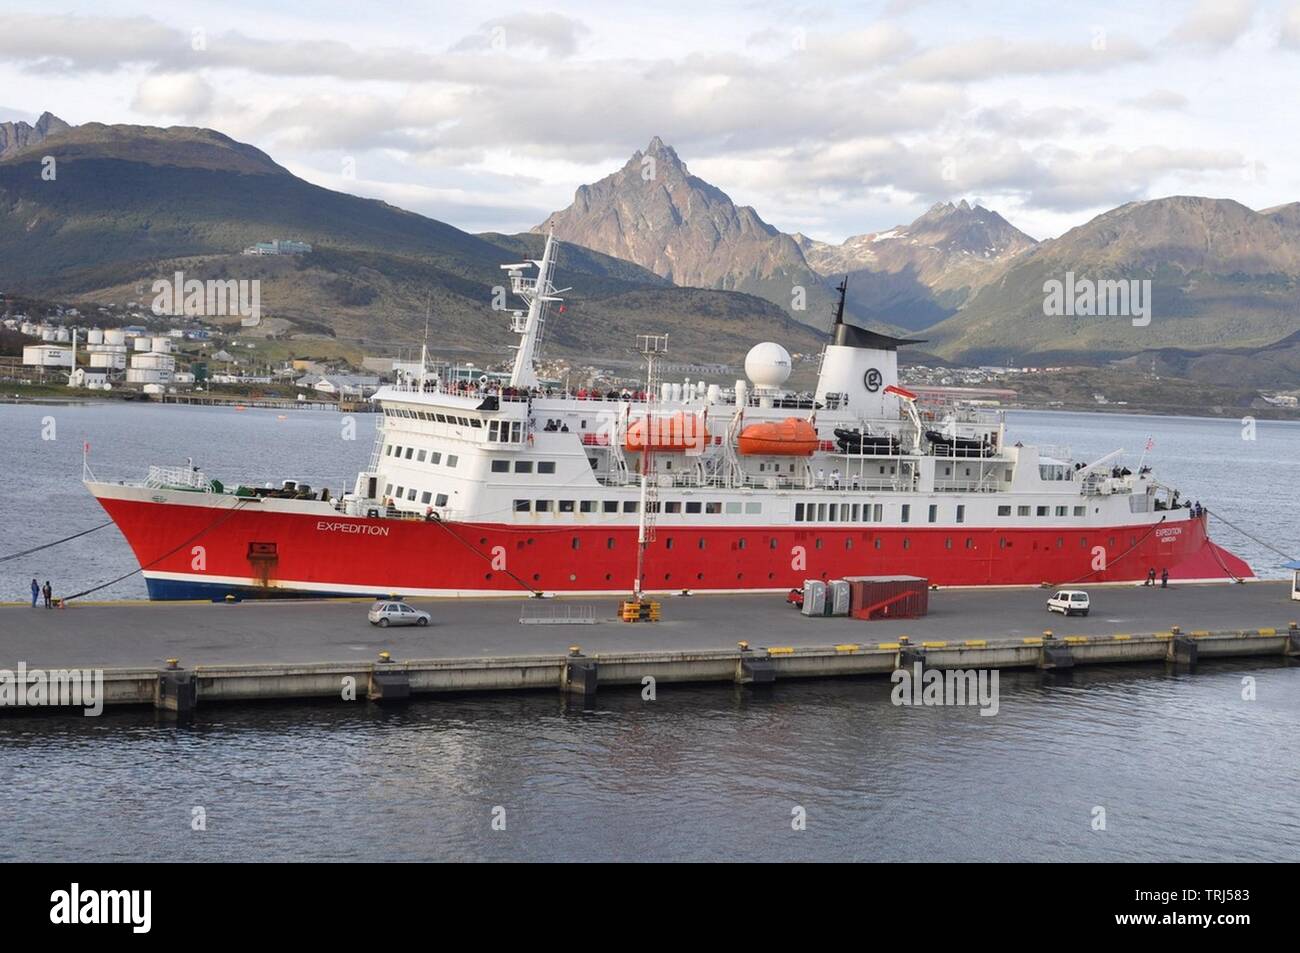 ANTARCTIC CRUISE SHIP MS EXPEDITION IN USHUAIA, ARGENTINA Stock Photo